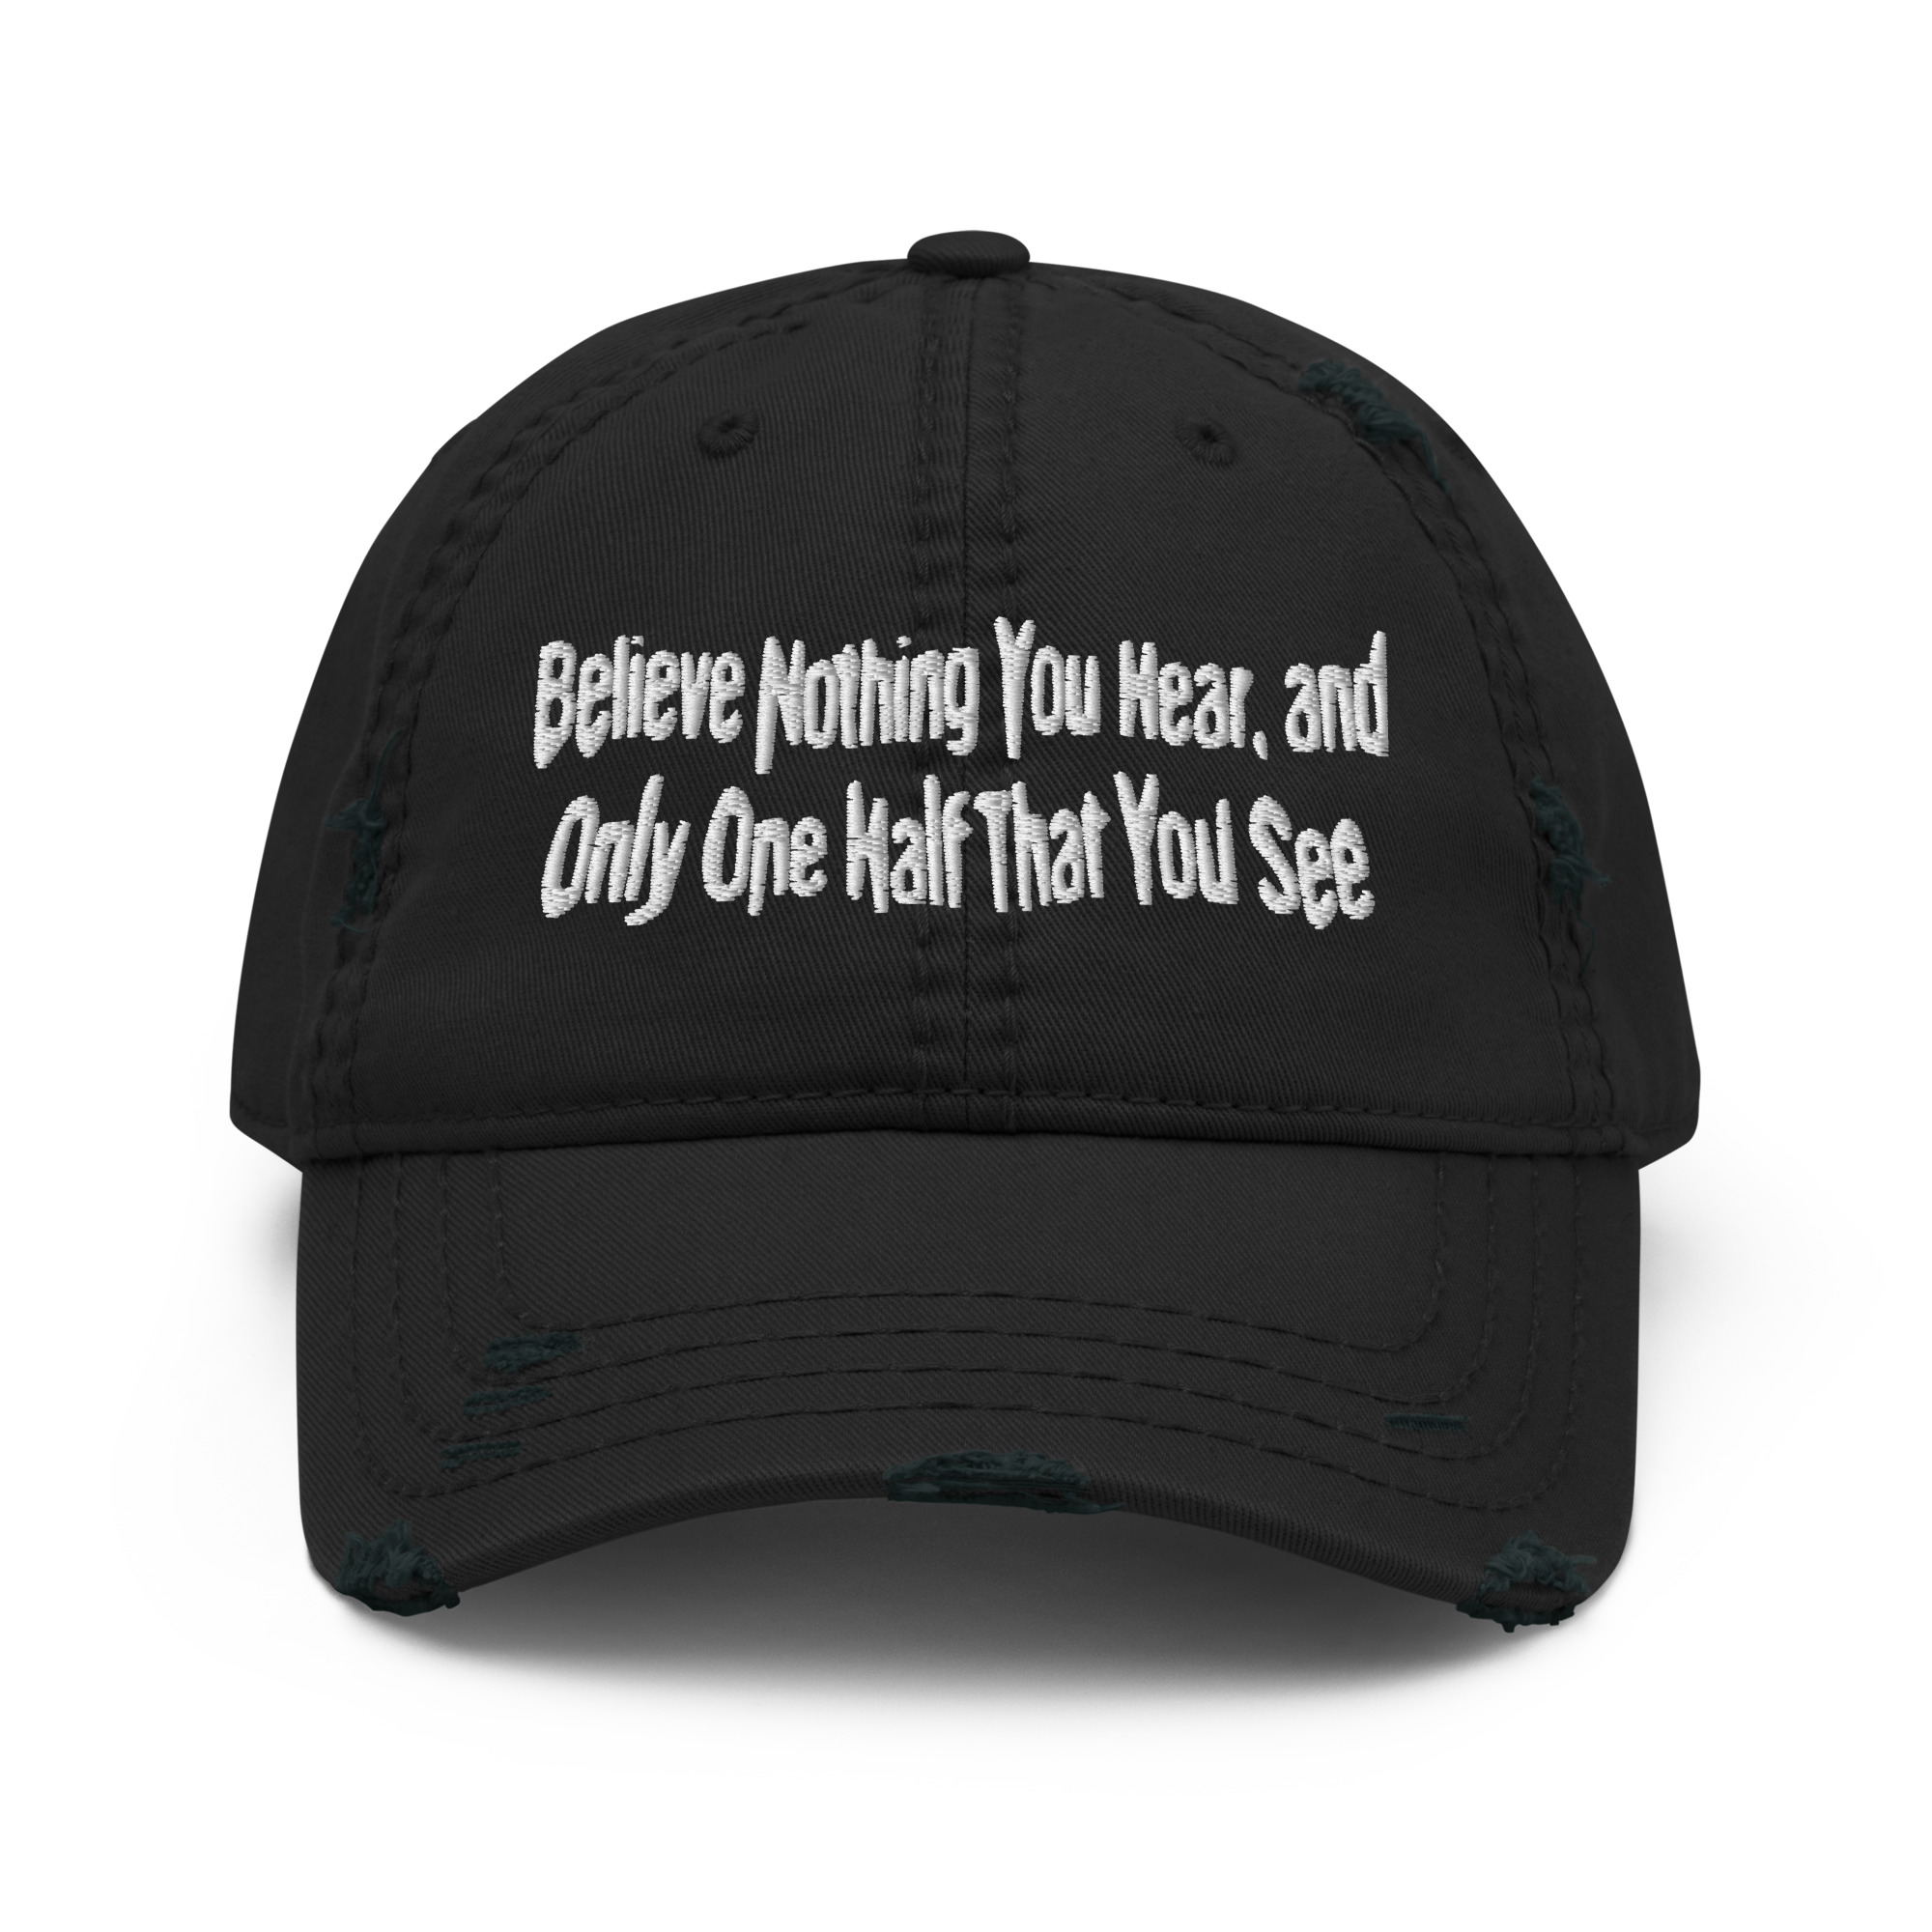 Featured image for “Believe Nothing You Hear - Distressed Dad Hat”